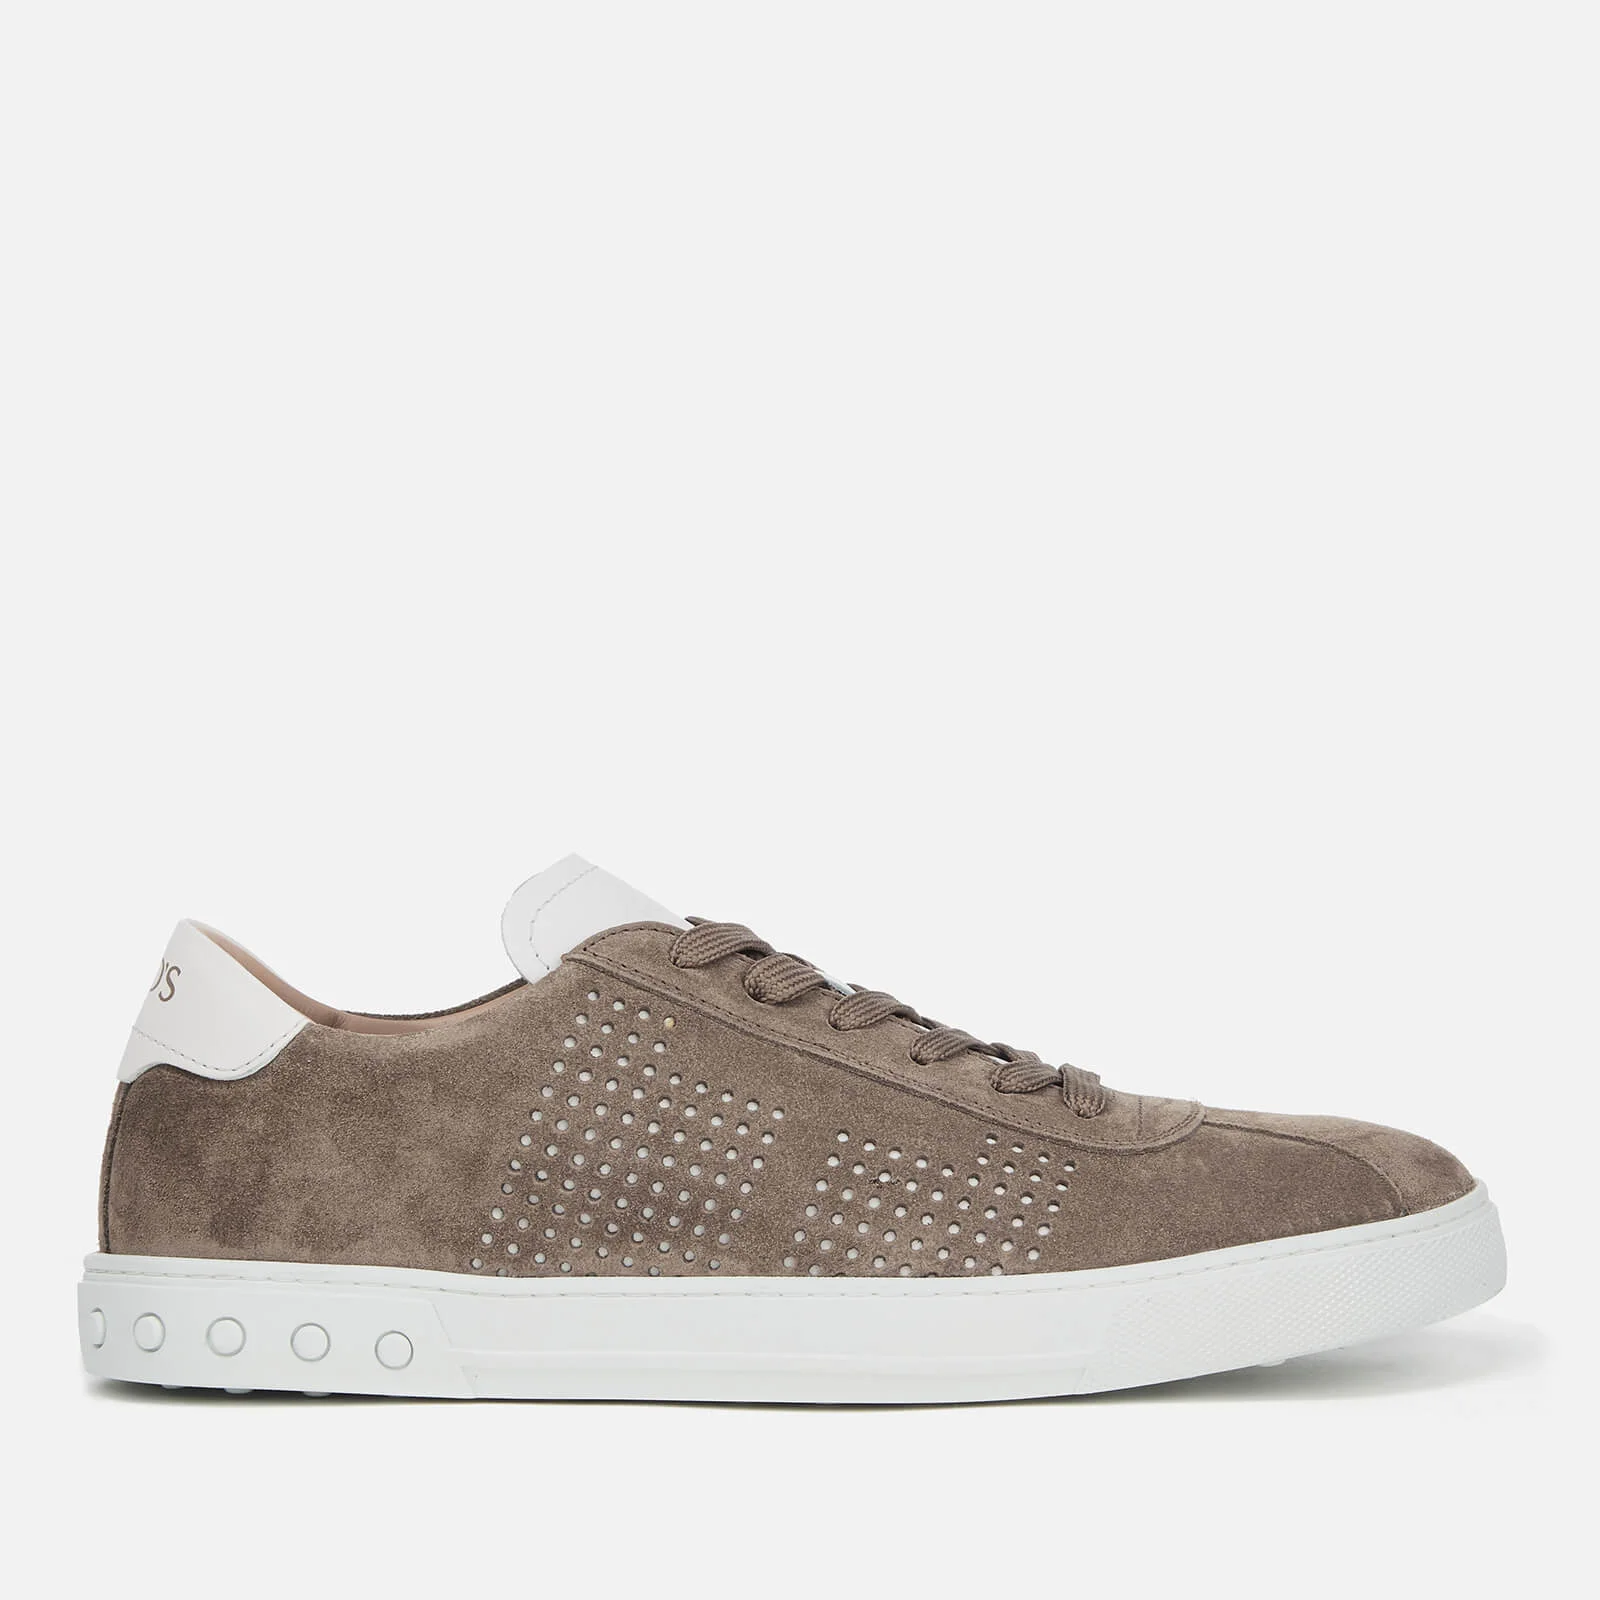 Tod's Men's Suede Perforated Side Trainers - Beige Image 1